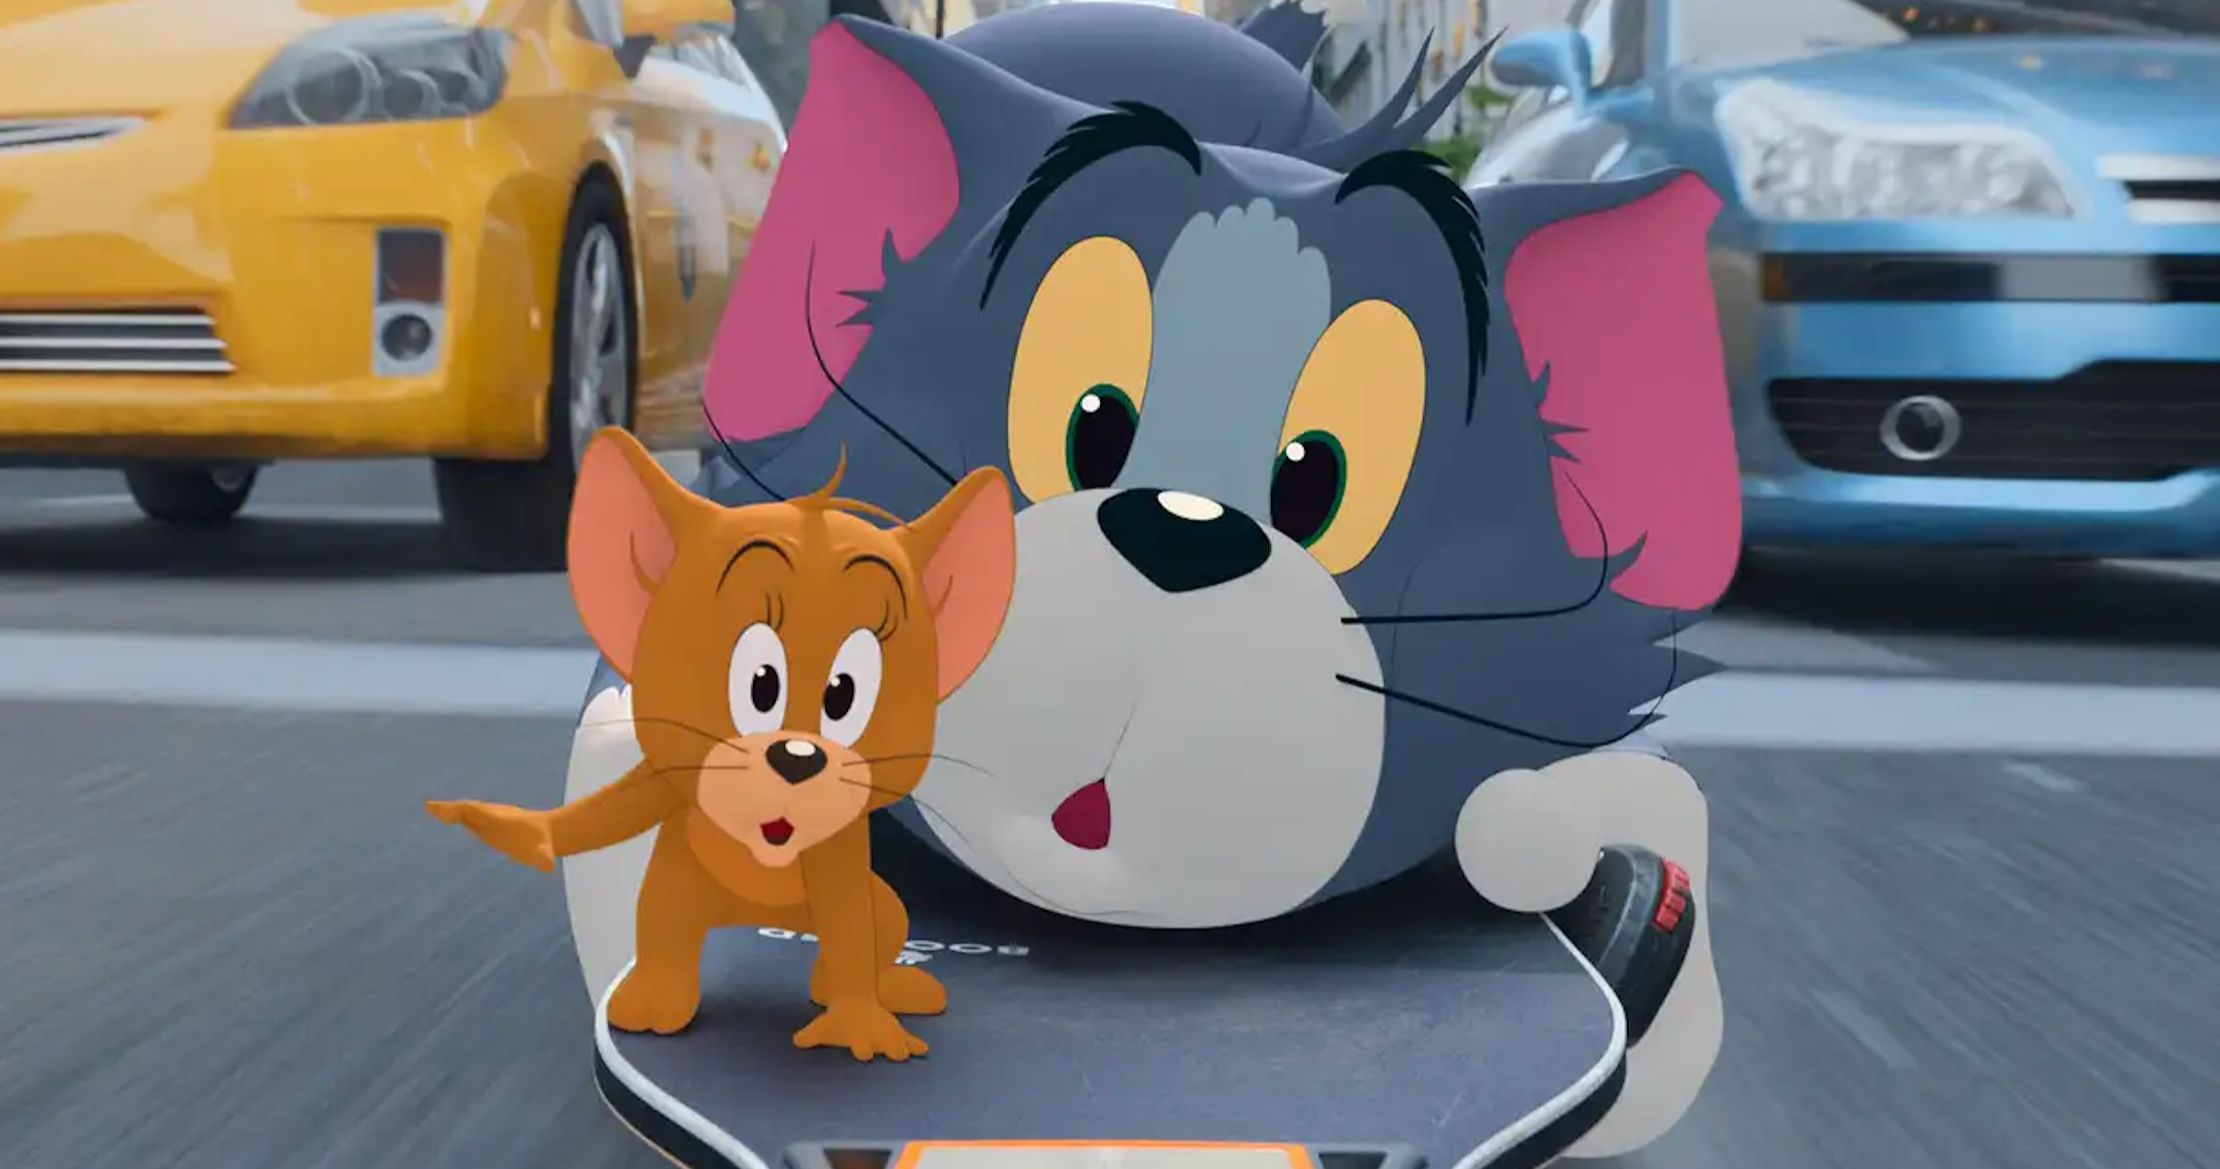 Tom &amp; Jerry Dominates the Weekend Box Office with $13.7M Win